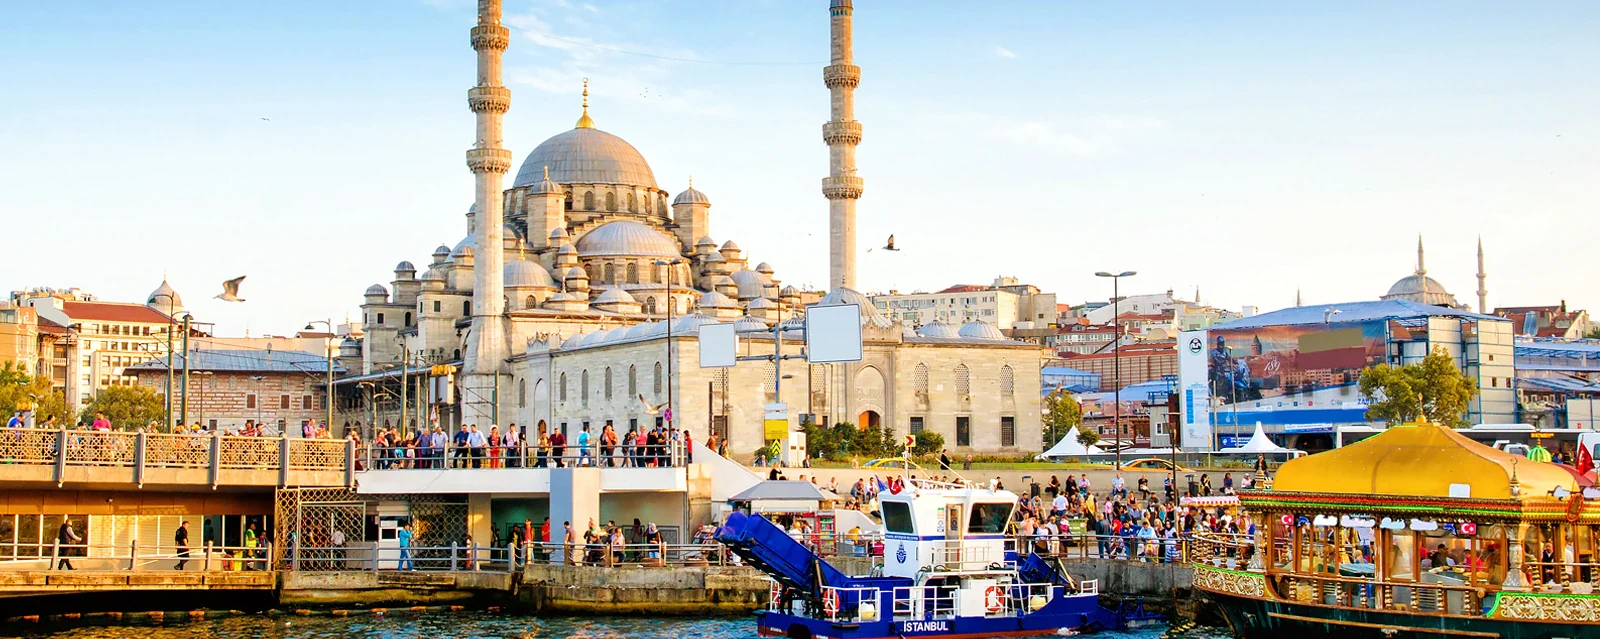 Best Place To Visit in Istanbul